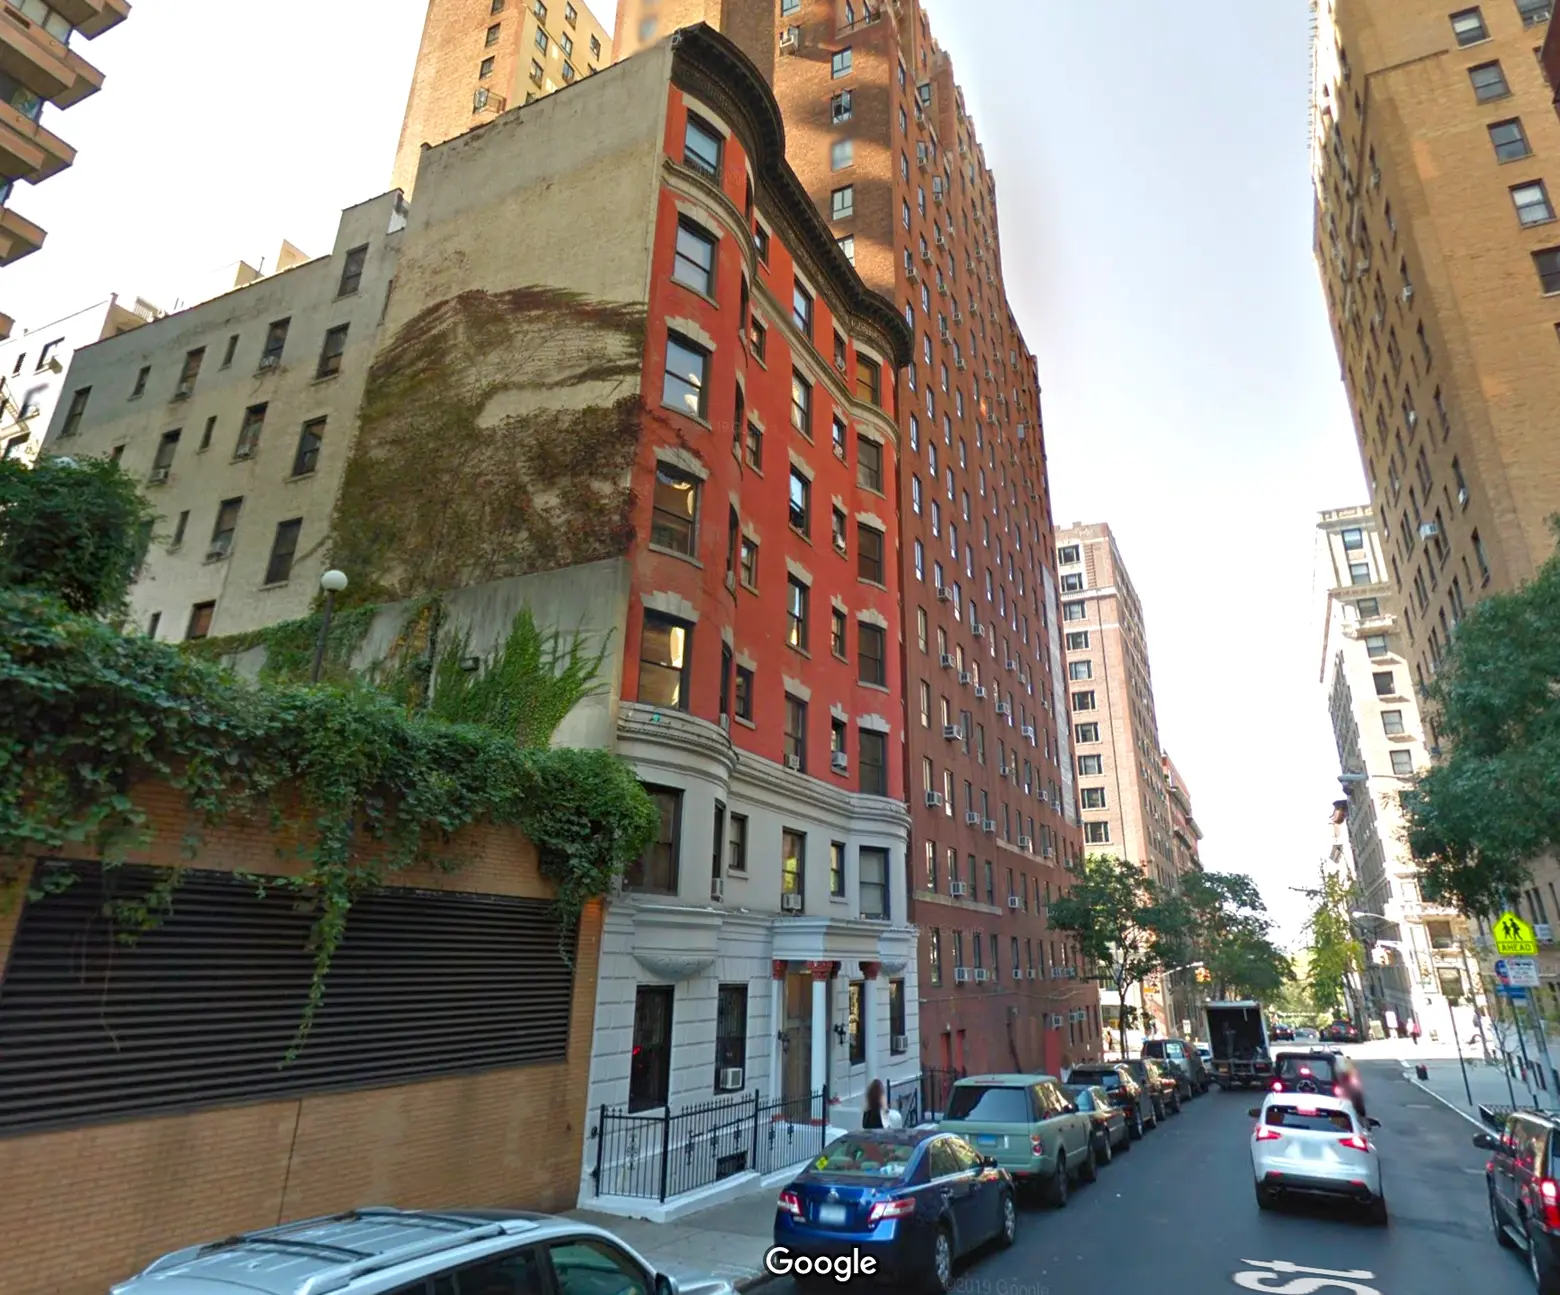 Former illegal Upper West Side hotel will become apartments for homeless and low income residents